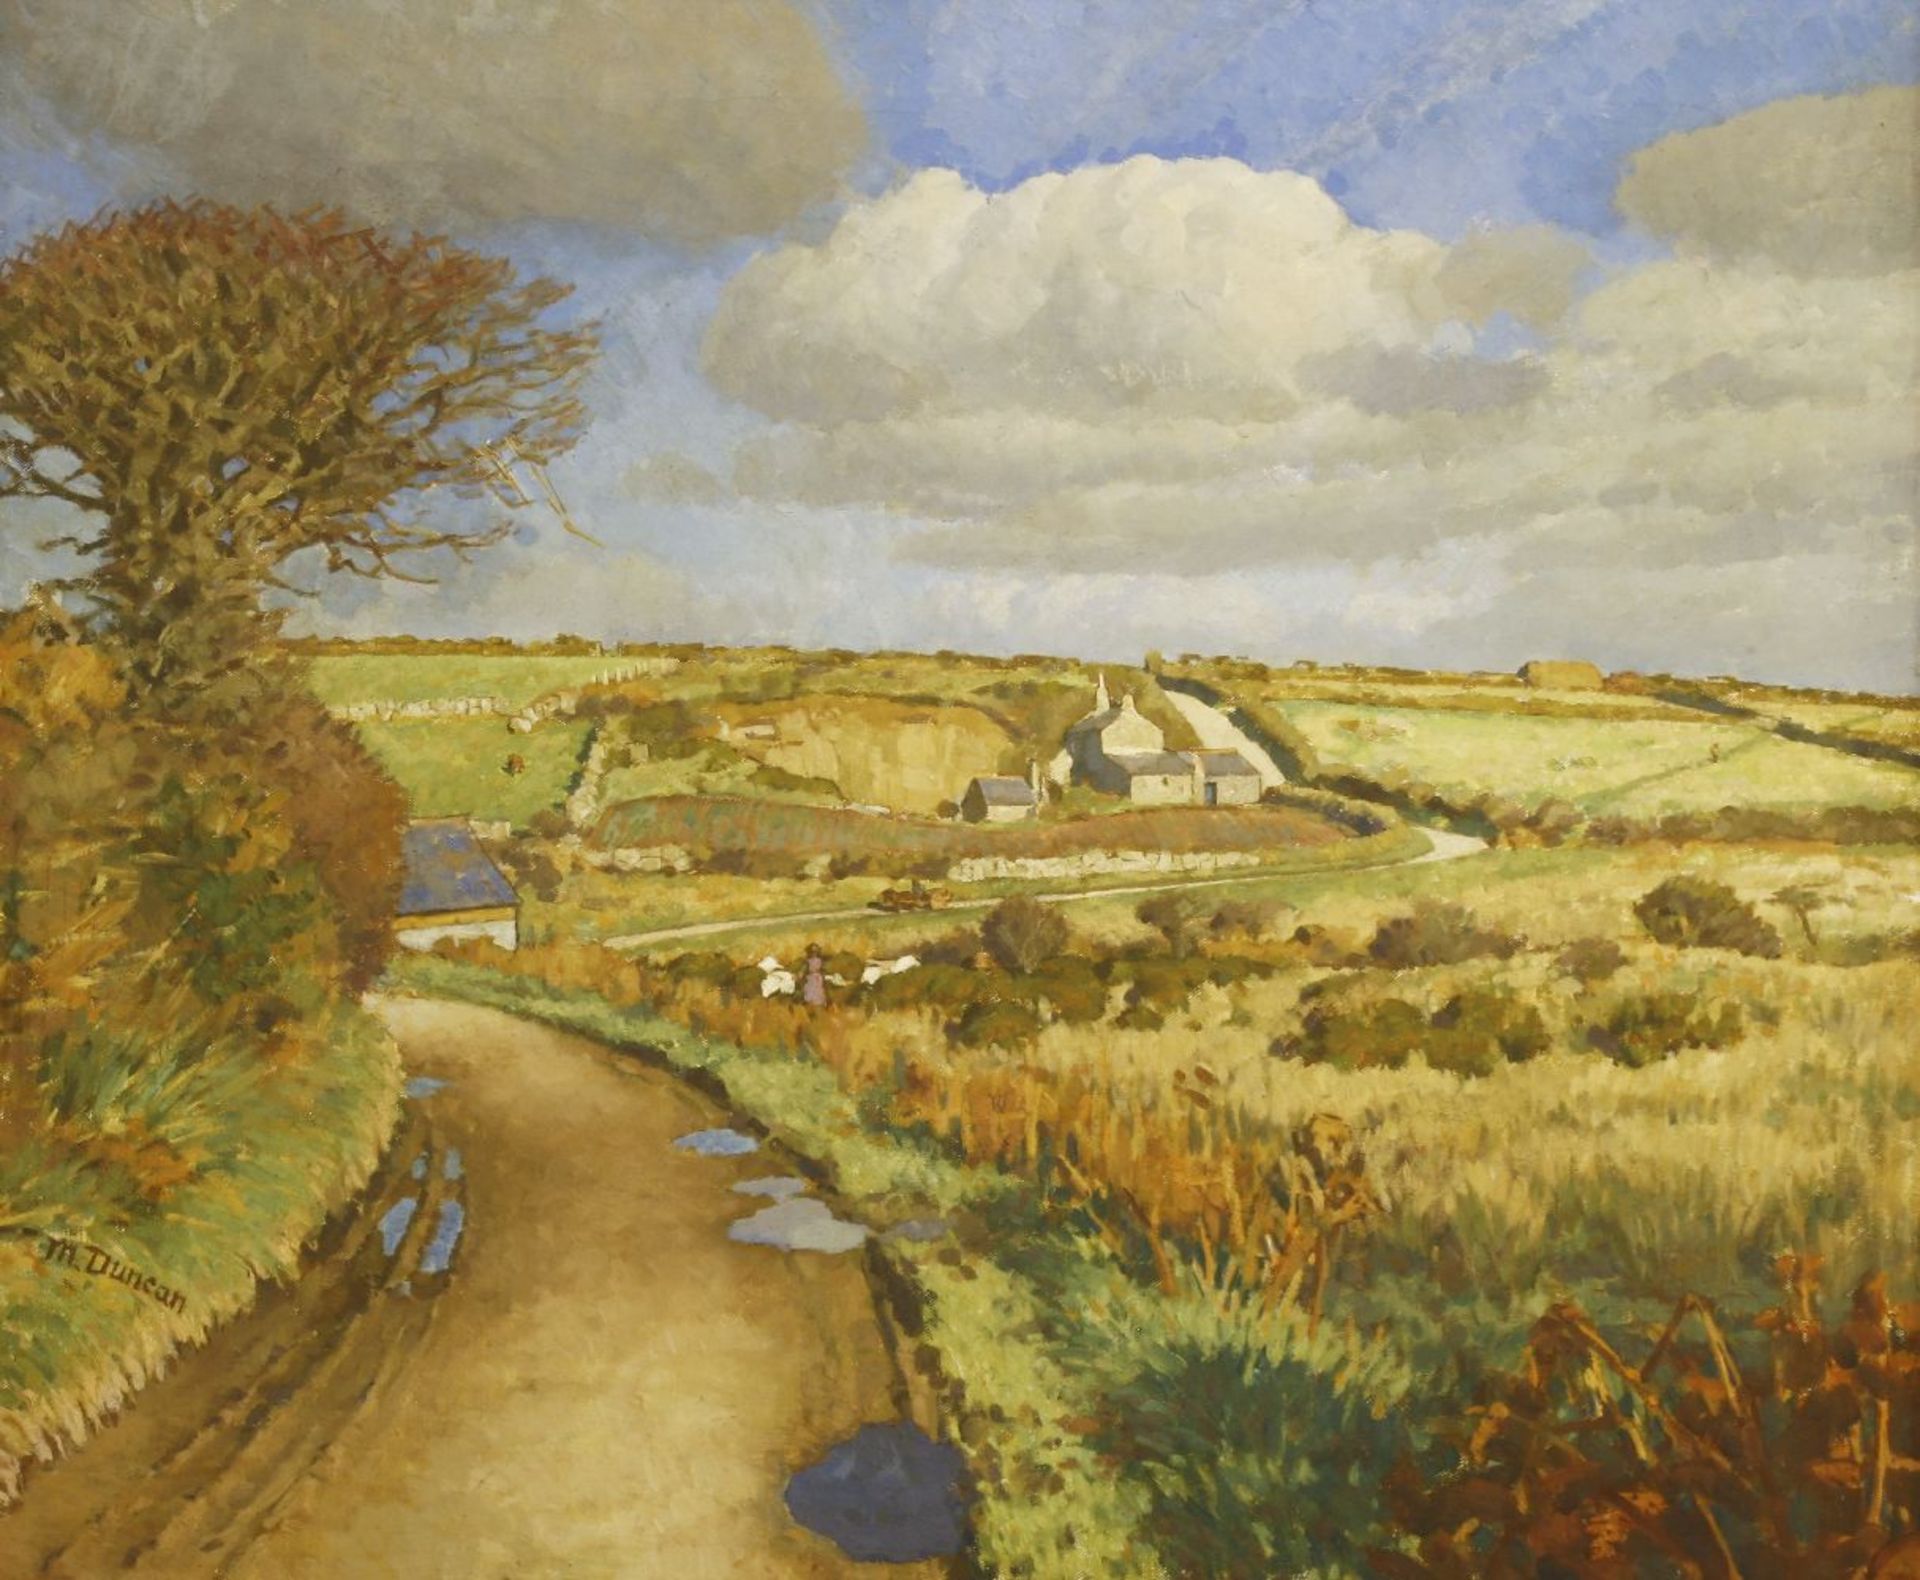 *Mary Duncan (1885-1964)A CORNISH LANDSCAPESigned l.l., oil on canvas63 x 76cm*Artist's Resale Right